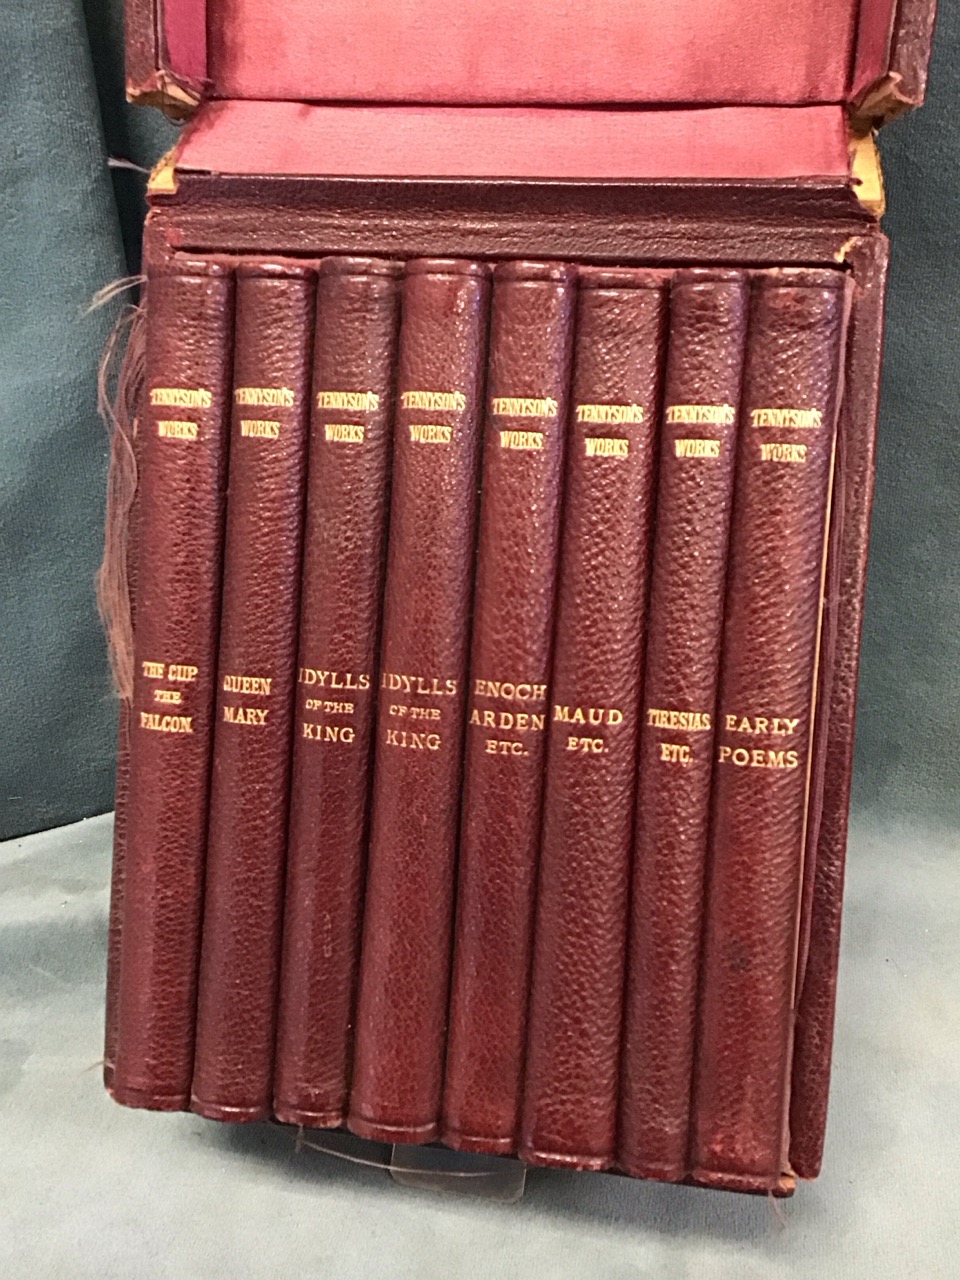 A Victorian cased set of Tennyson Works, the eight leather bound volumes published in 1892 by - Image 2 of 3